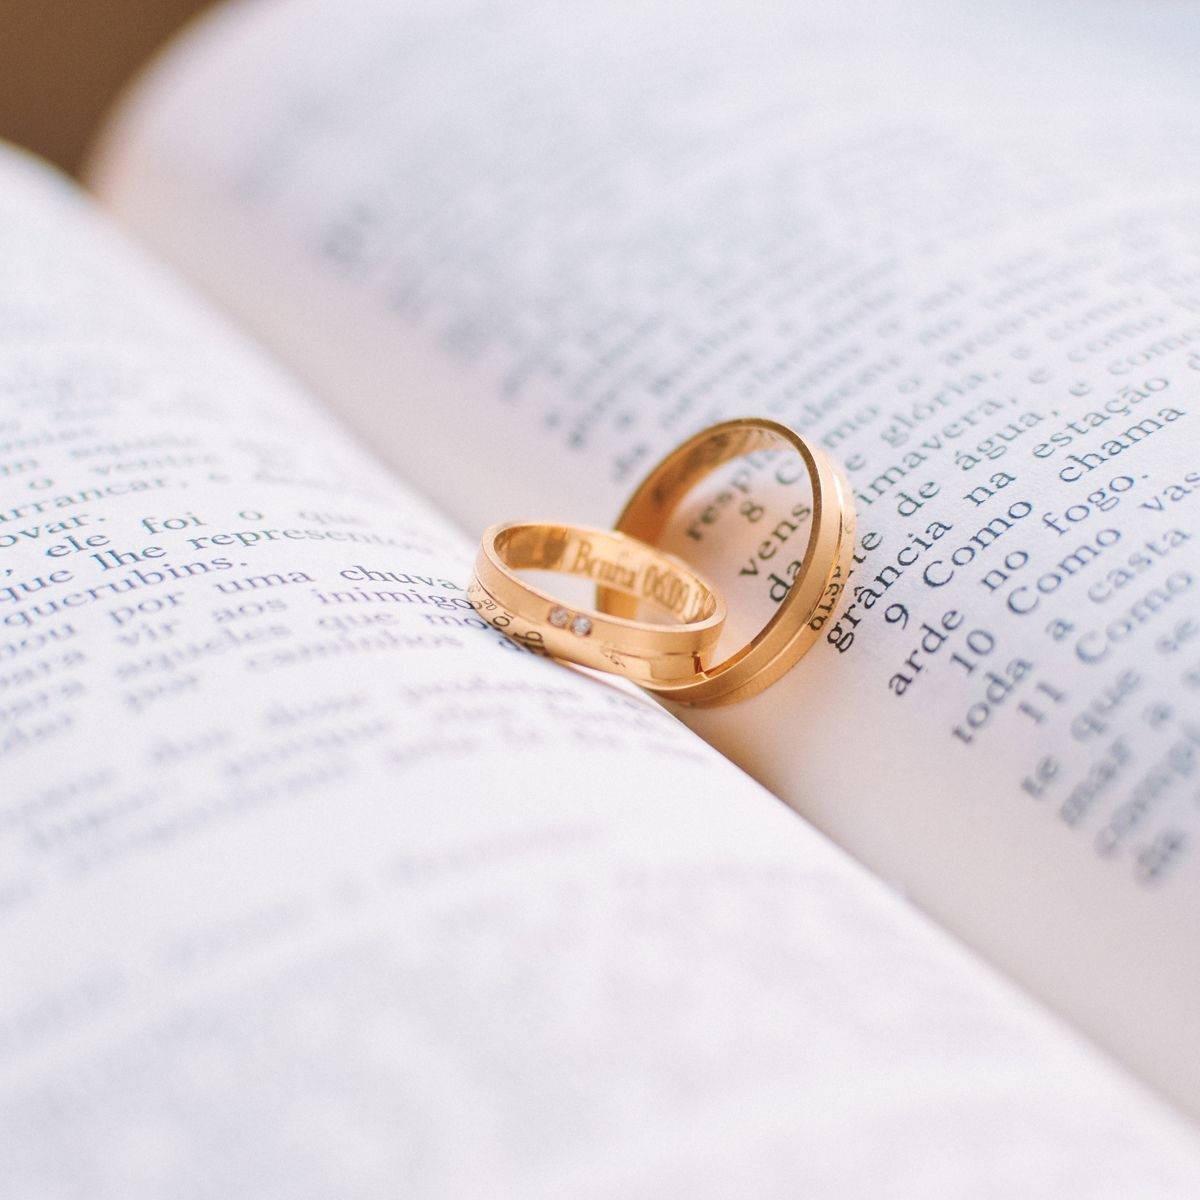 Gold Wedding Rings On Book Background